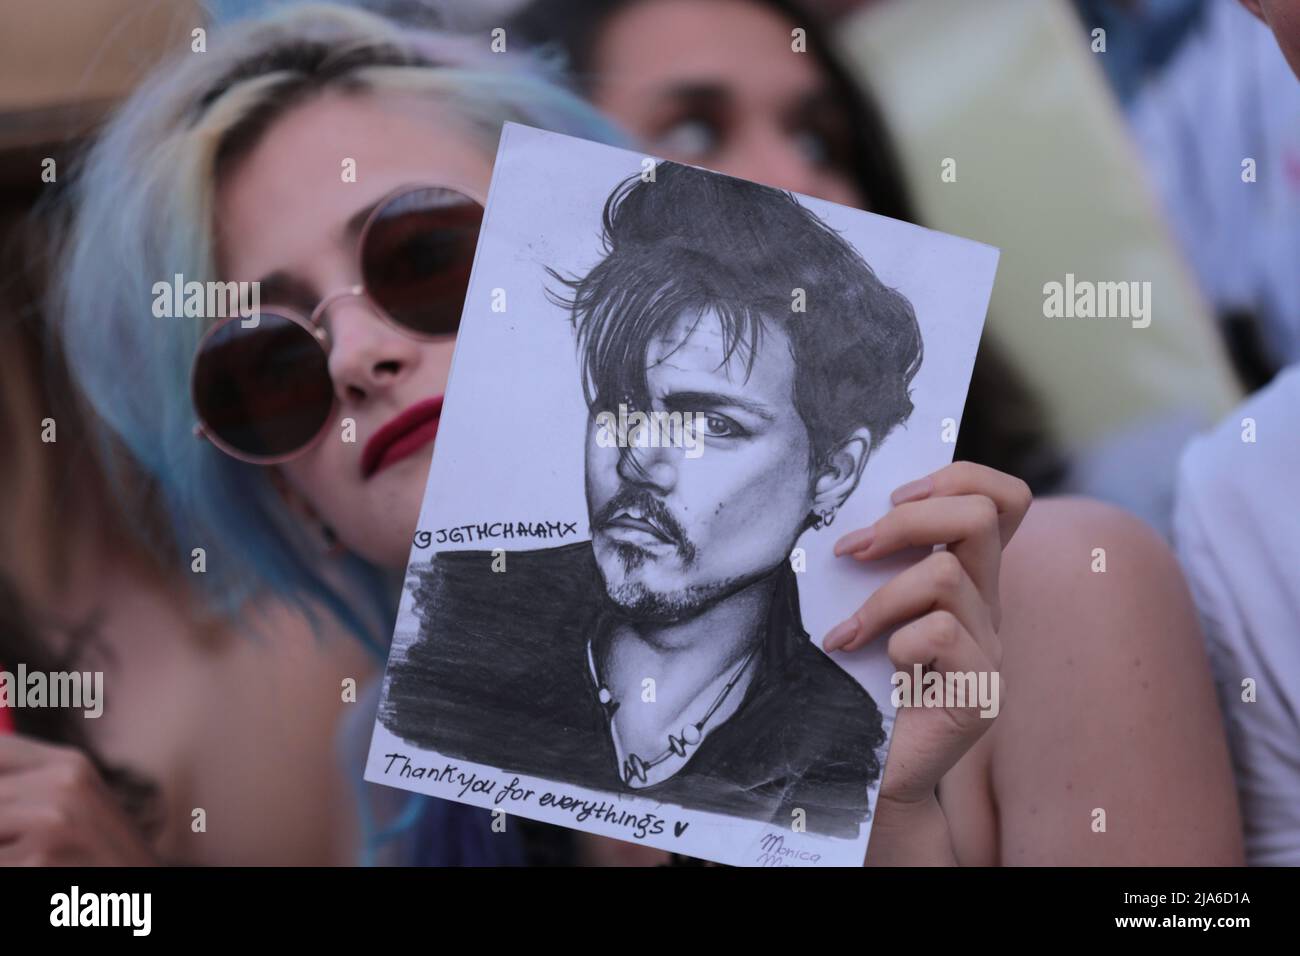 Actor Johnny Depp and his wife Amber Heard arrive for the red carpet event for the movie 'Black Mass' at the 72nd Venice Film Festival. Stock Photo